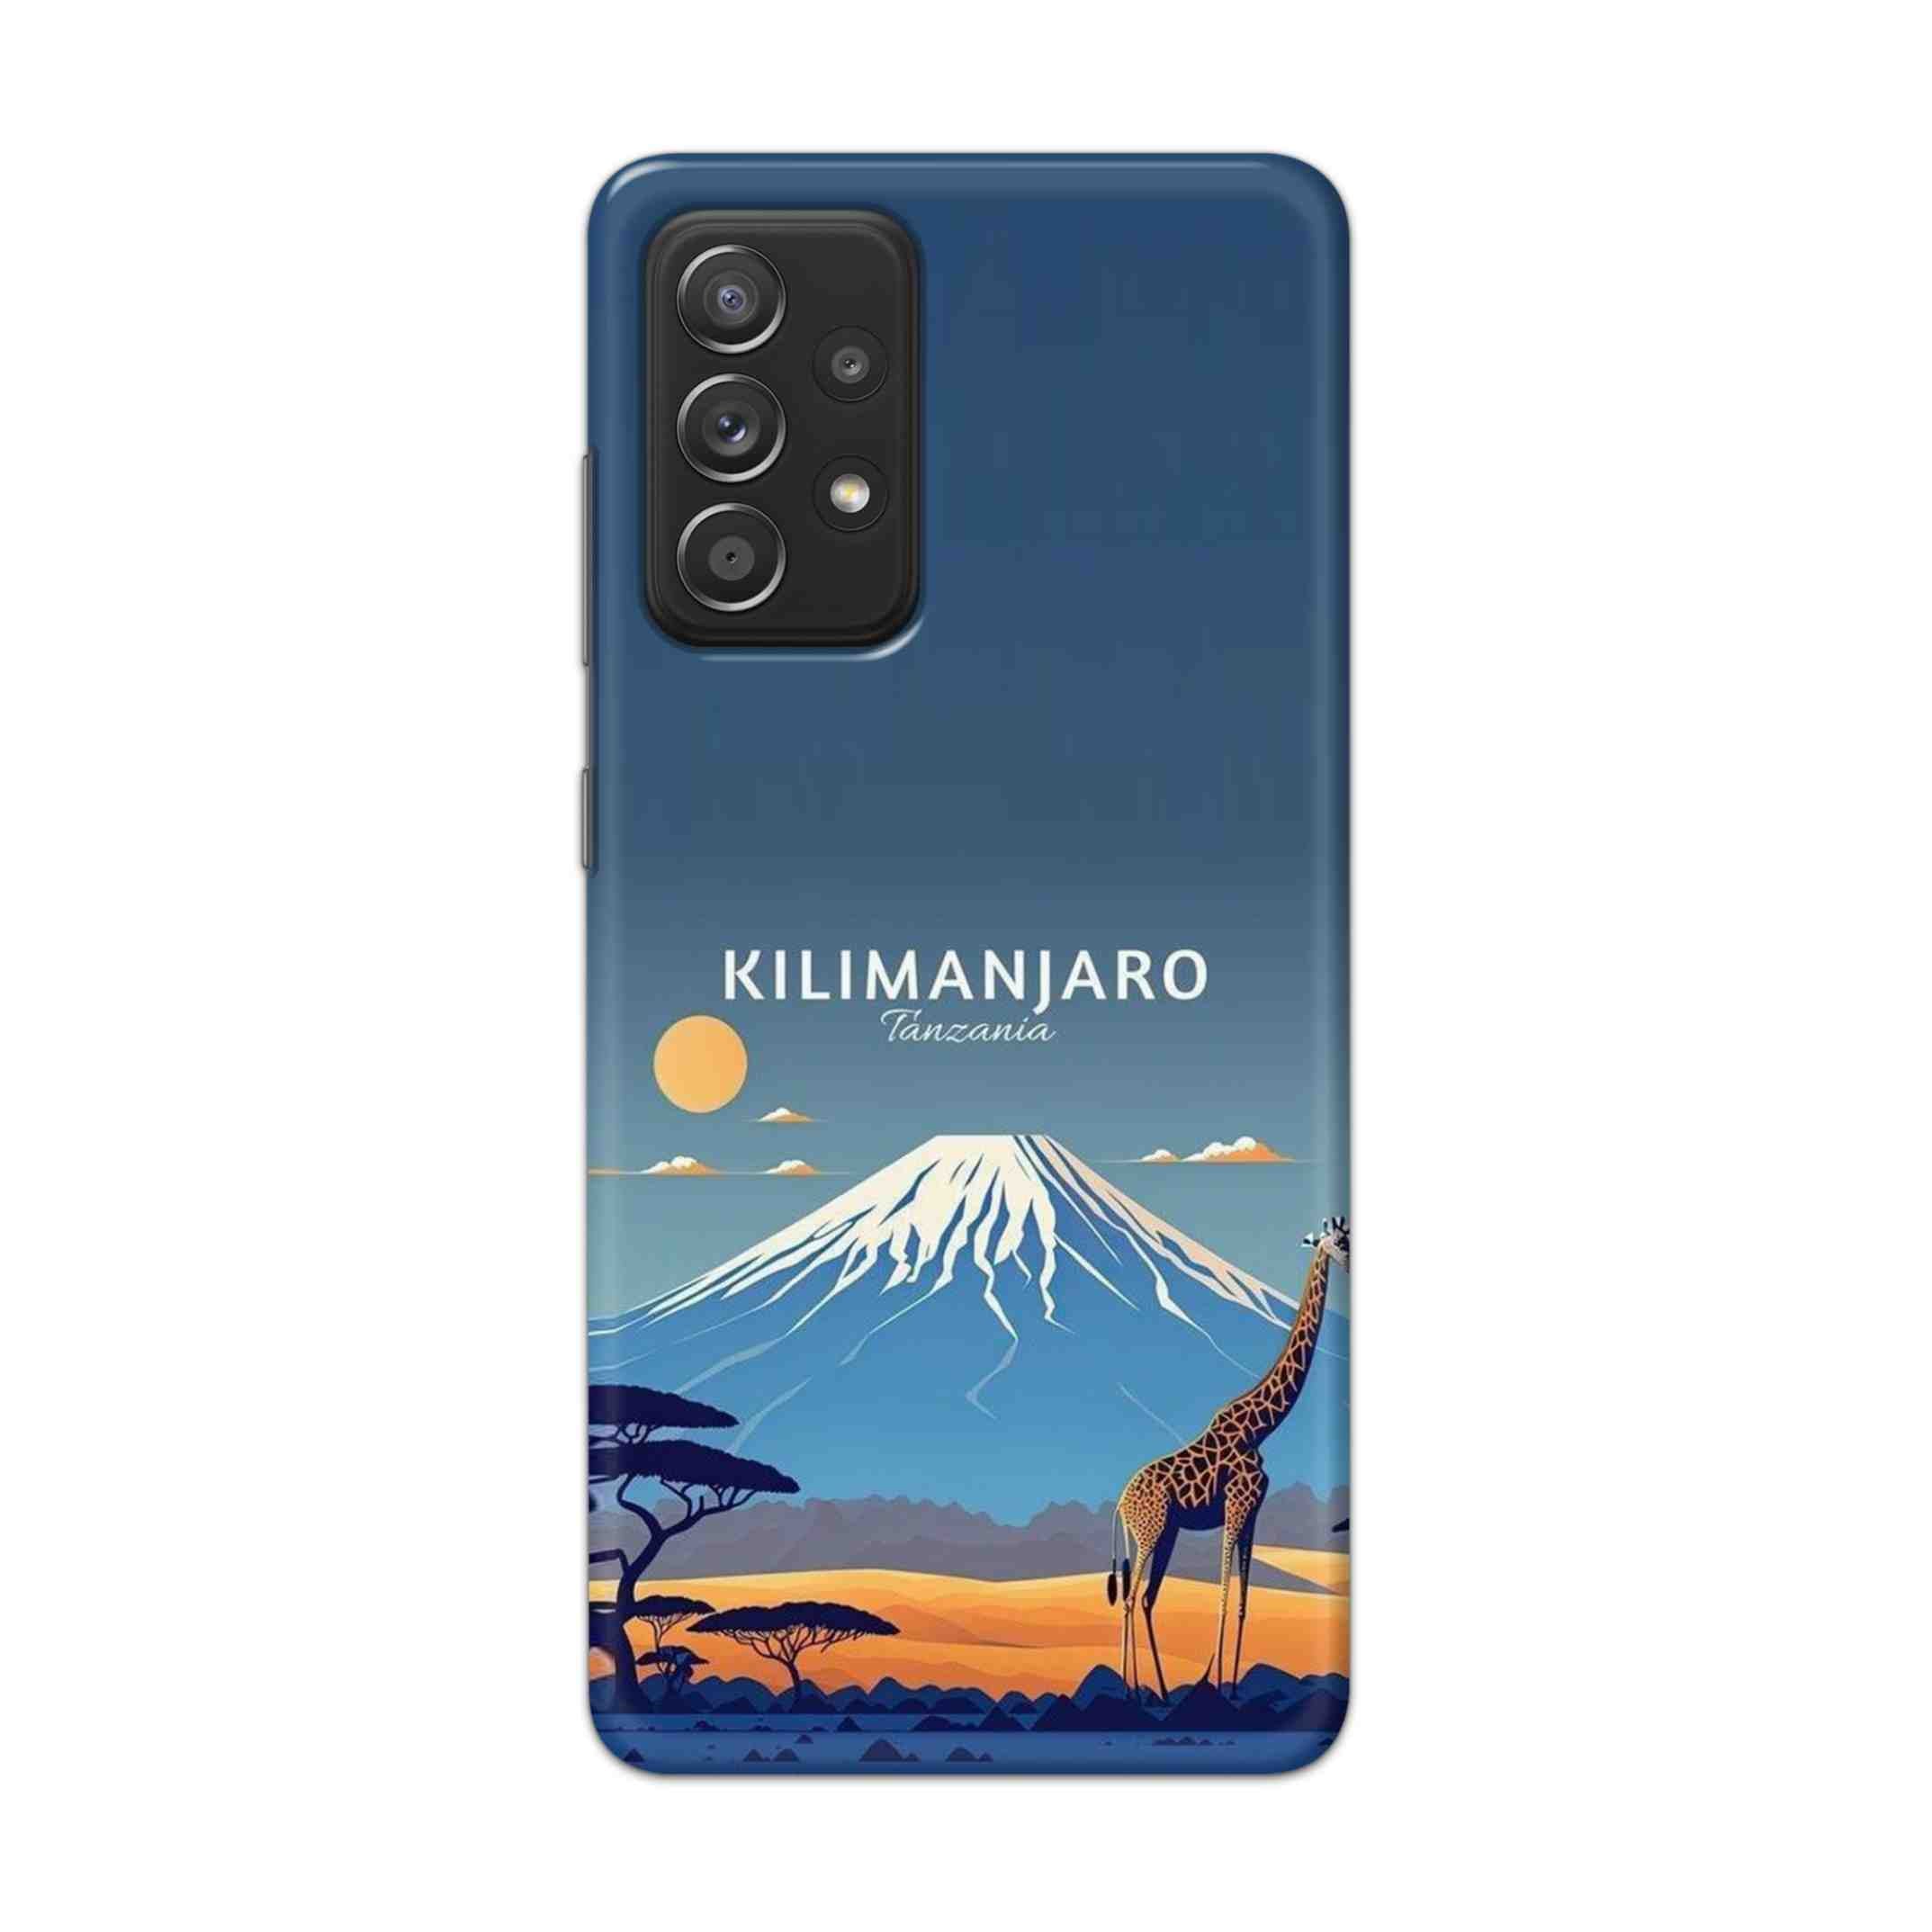 Buy Kilimanjaro Hard Back Mobile Phone Case Cover For Samsung Galaxy A52 Online